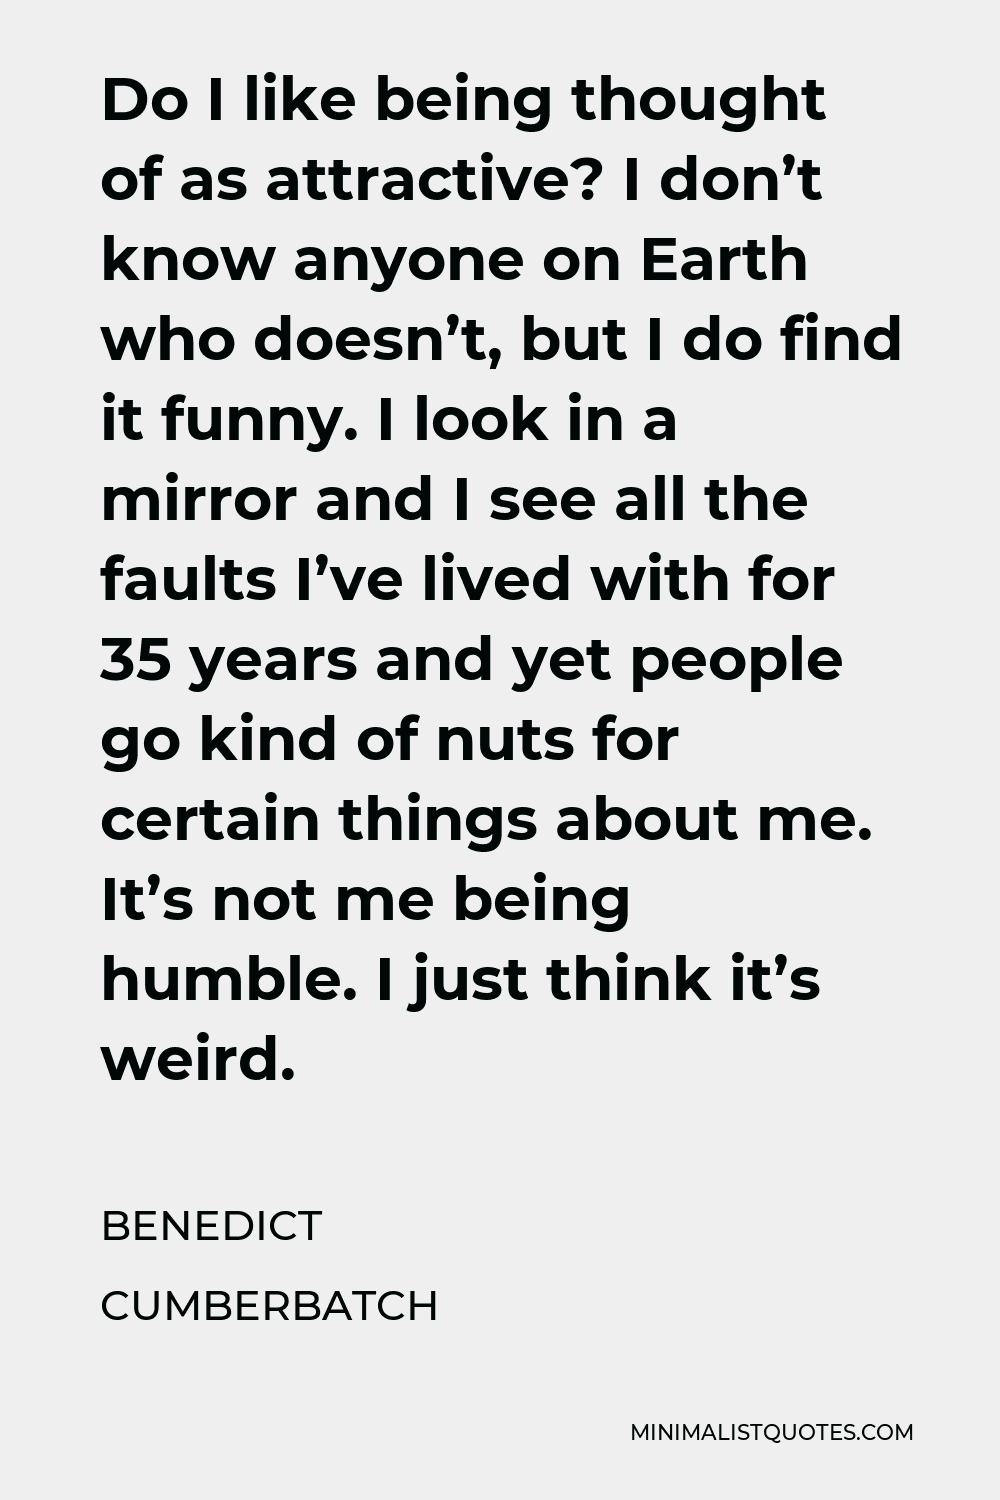 Benedict Cumberbatch Quote - Do I like being thought of as attractive? I don’t know anyone on Earth who doesn’t, but I do find it funny.